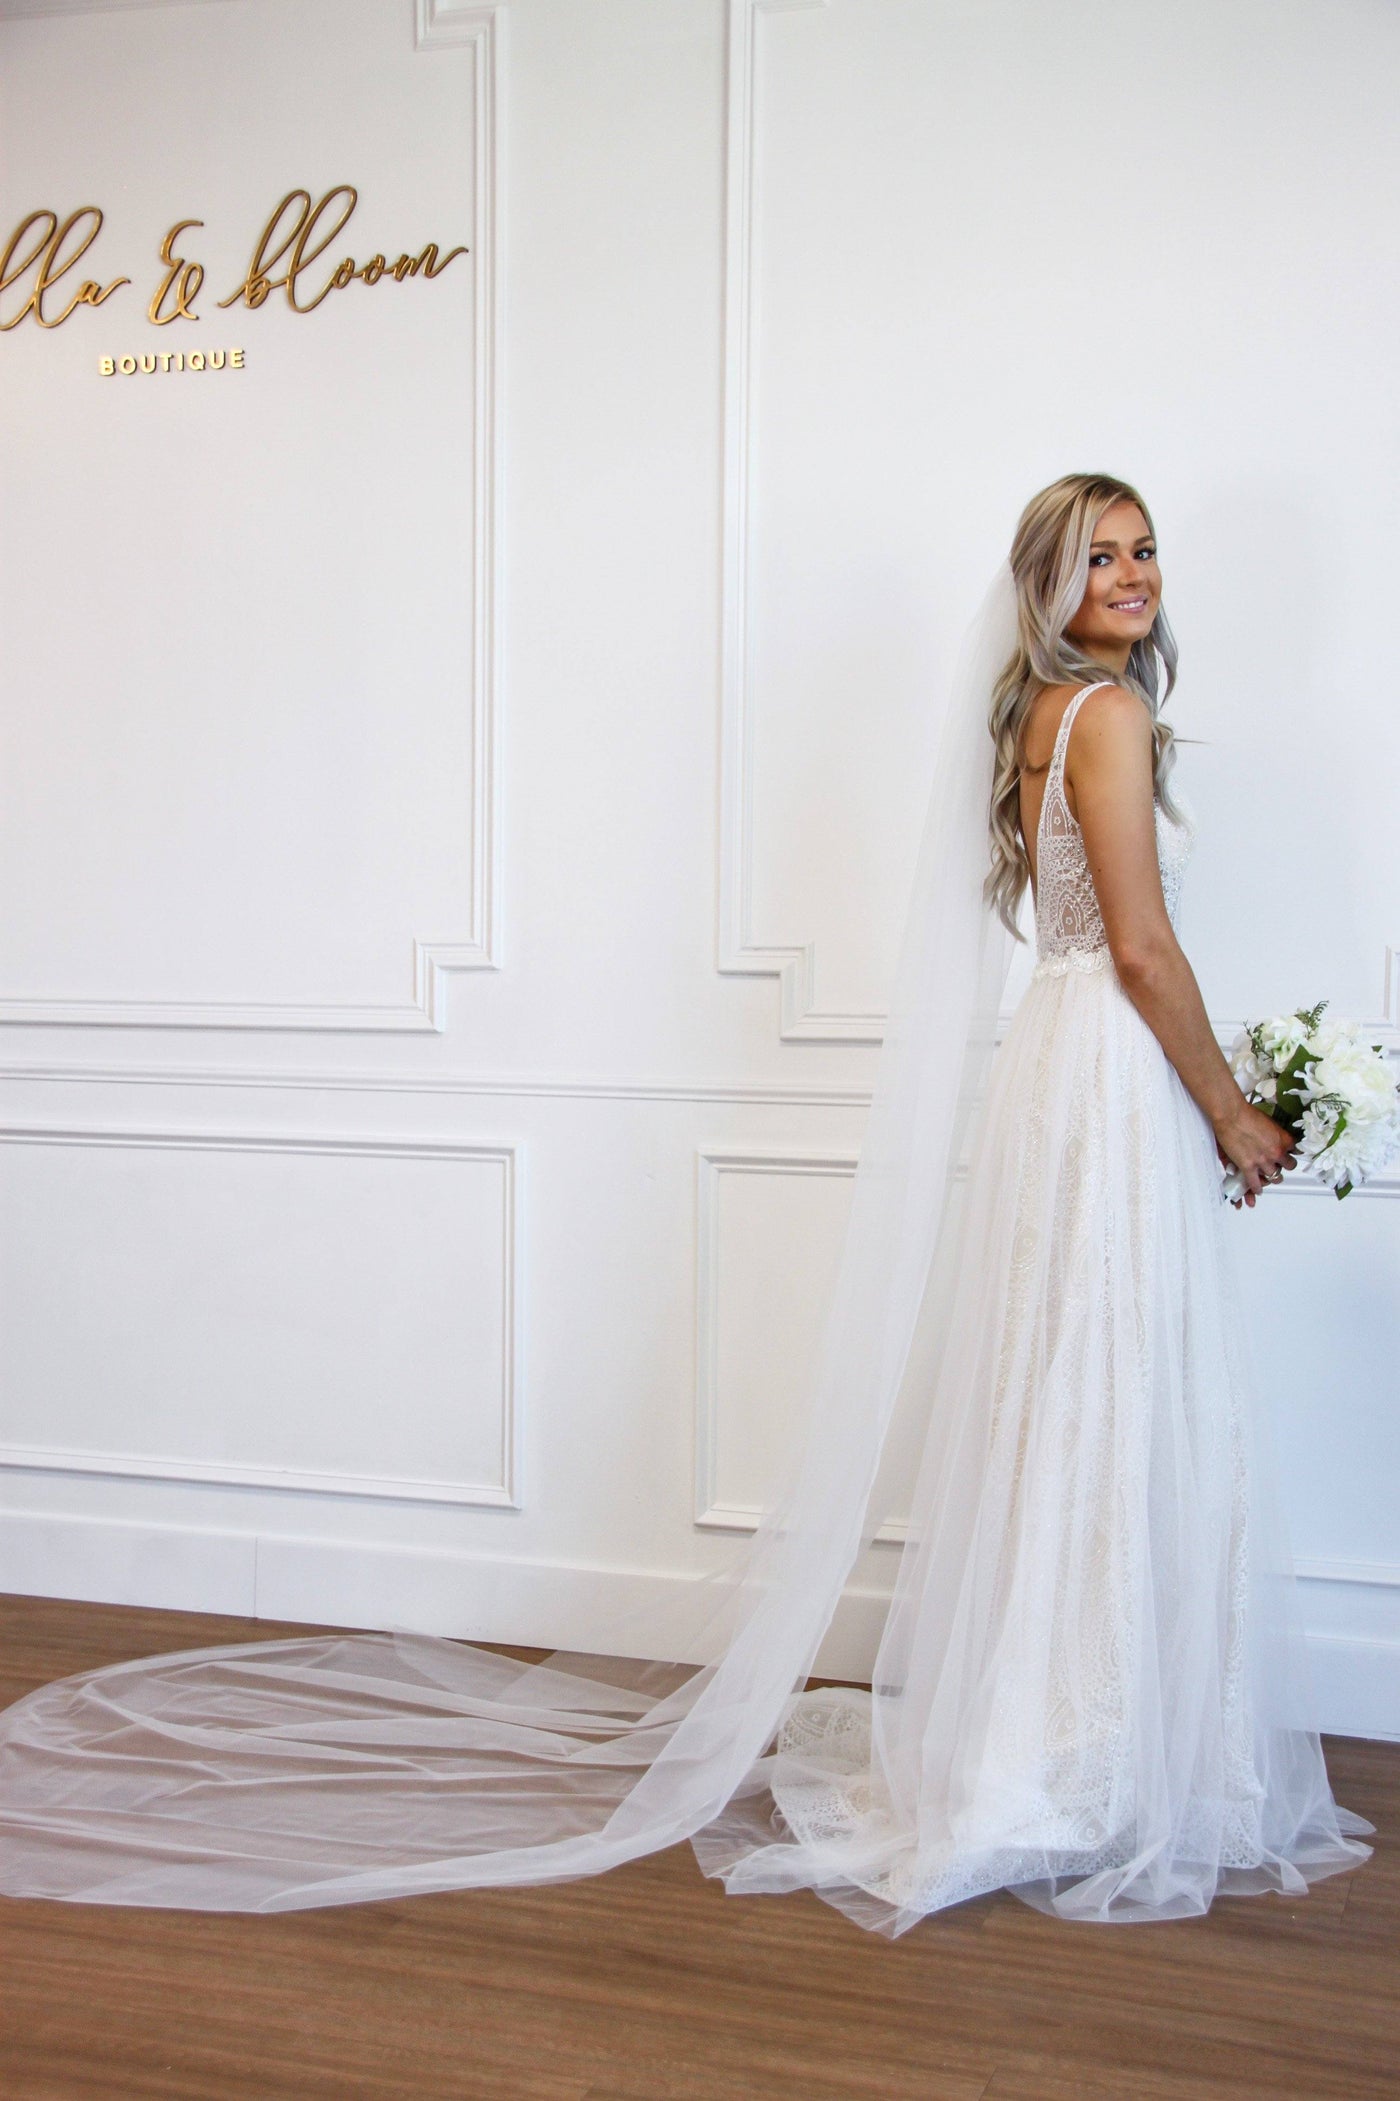 Say I Do Lace Wedding Dress: Ivory/Nude - Bella and Bloom Boutique